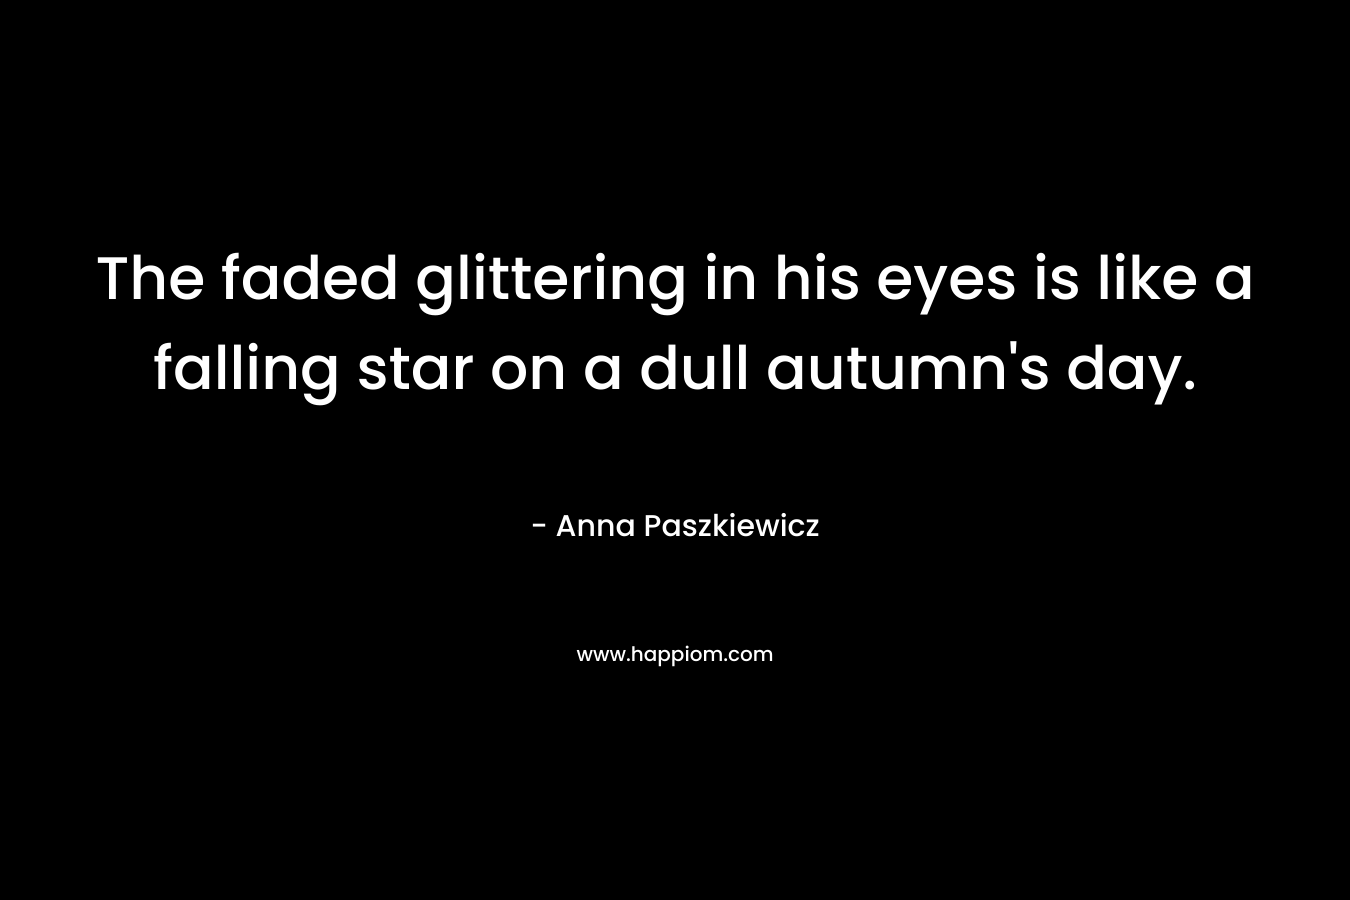 The faded glittering in his eyes is like a falling star on a dull autumn’s day. – Anna Paszkiewicz